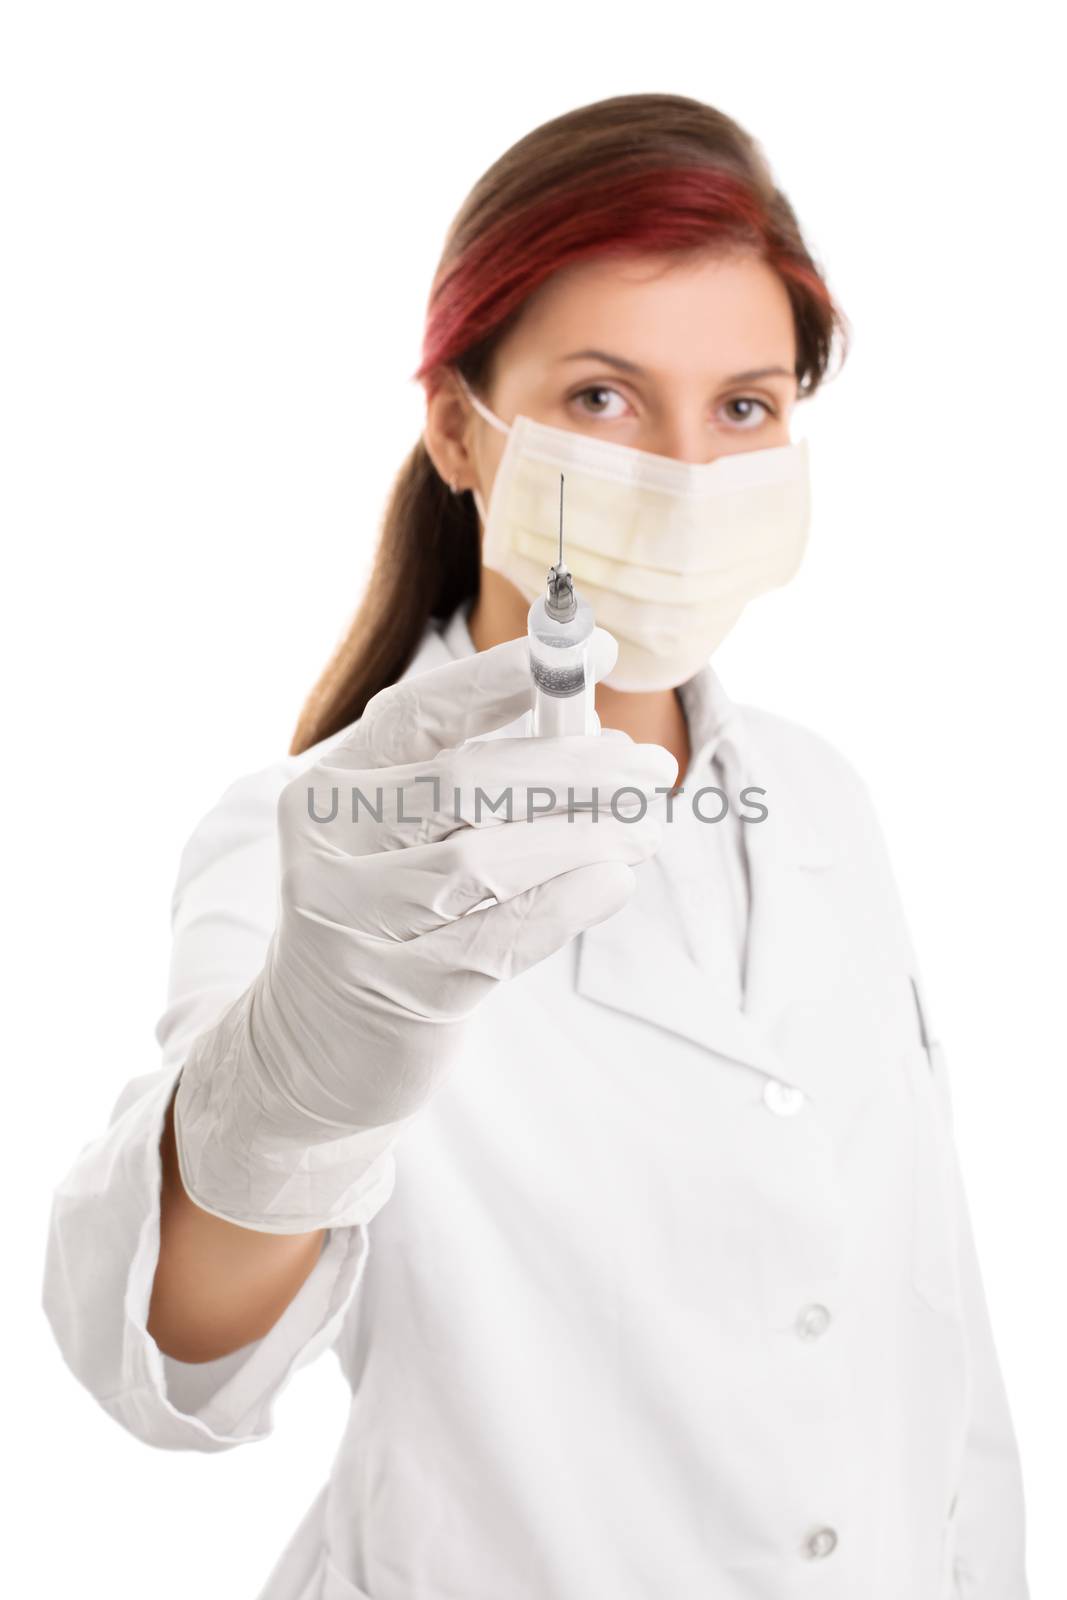 Young doctor wearing surgical mask and holding a syringe with a  by Mendelex